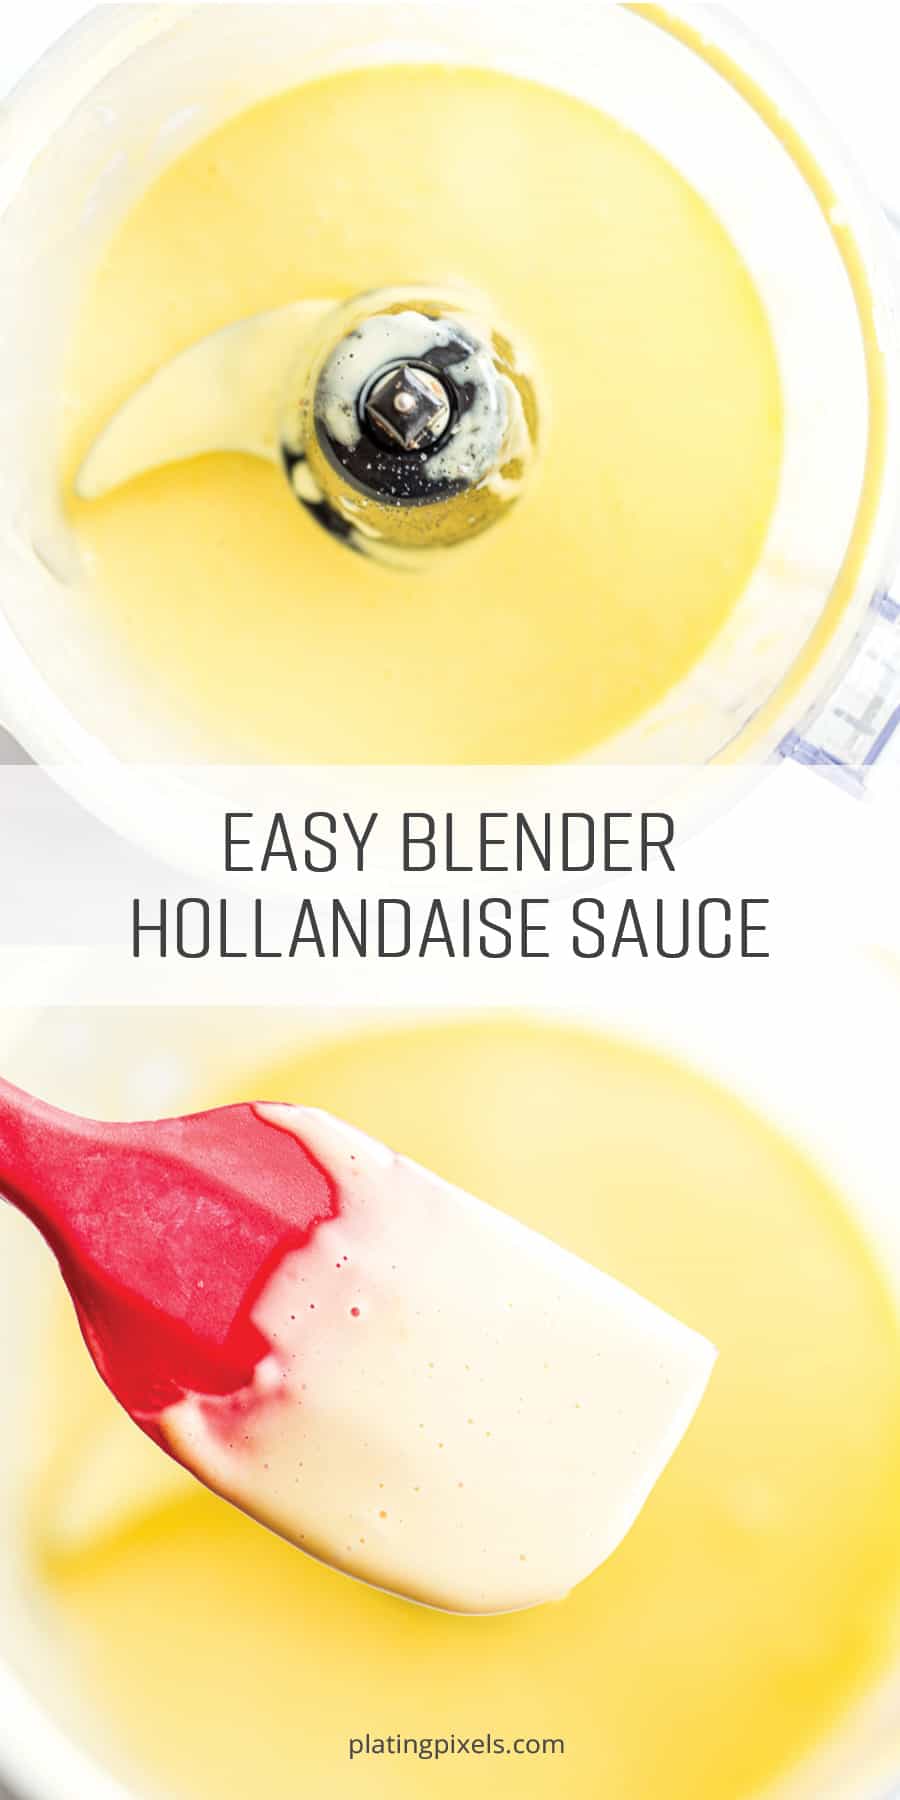 Easy Blender Hollandaise Sauce (with video)